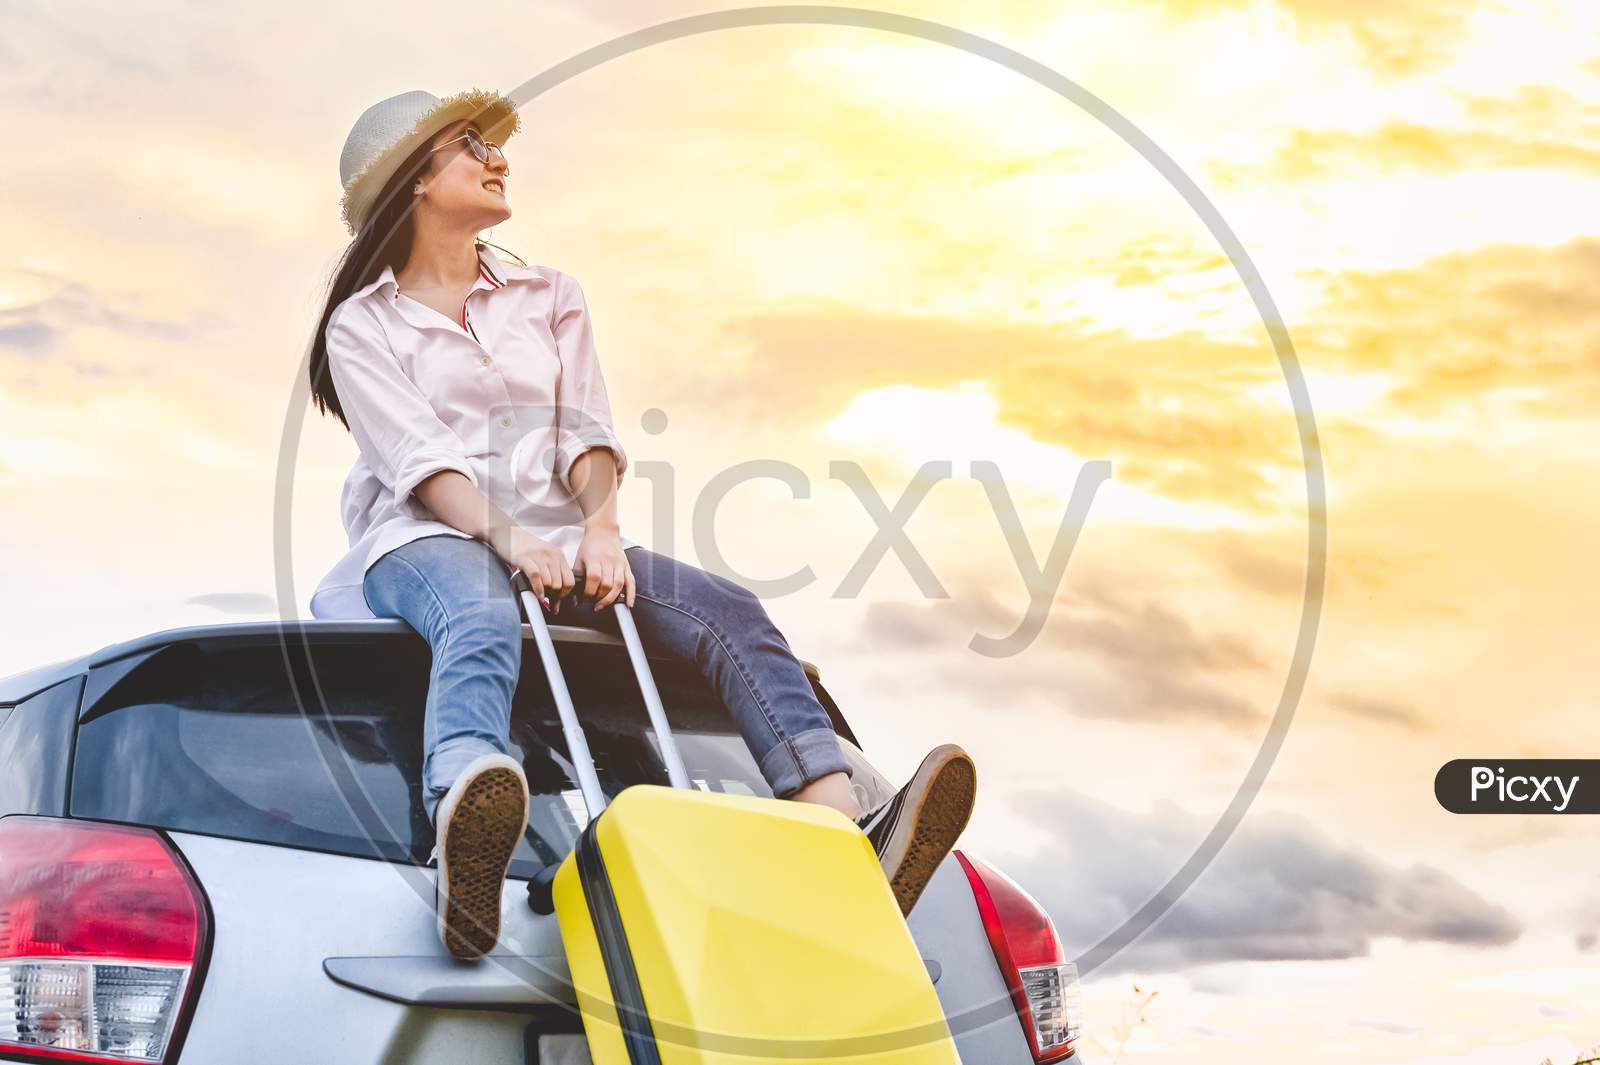 Happy Asian Woman On Top Of Car With Luggage Bag. Girl Sitting On Roof And Looking Sunset Before Night In Evening. People Lifestyle In Long Vacation Trip Concept. Nature And Transportation Vehicle.